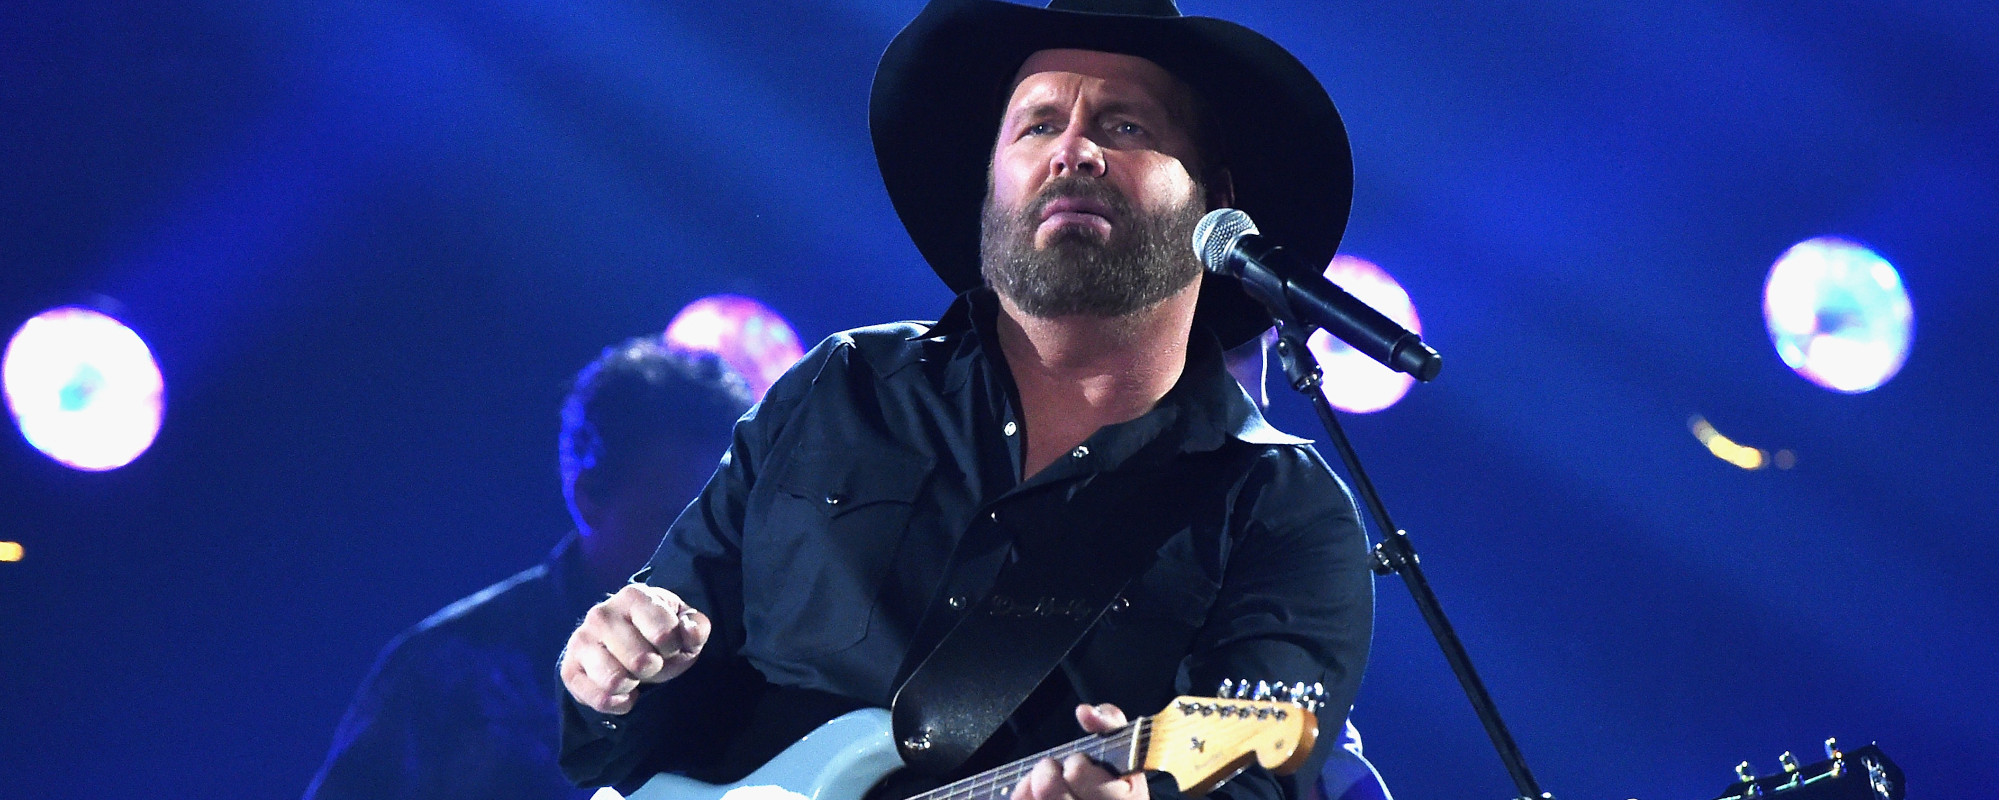 Garth Brooks Invites Travis Kelce to Sing at Honky Tonk Opening After His Drunken “Friends in Low Places” Rendition